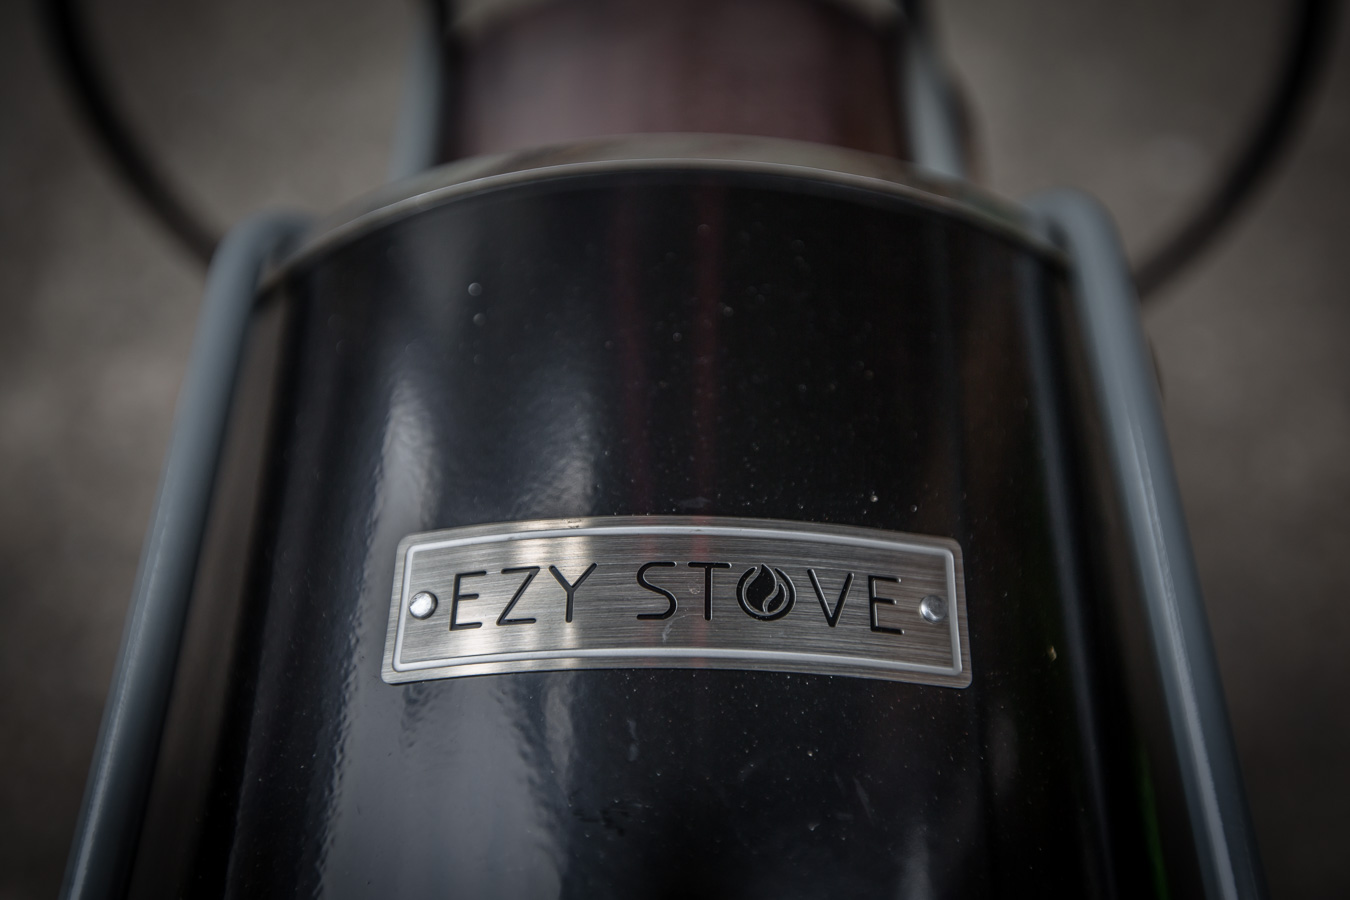 Ezy stove, rocket stove, review, hikes, bikes, explore, cooking, wild, outdoors, camping, fire,